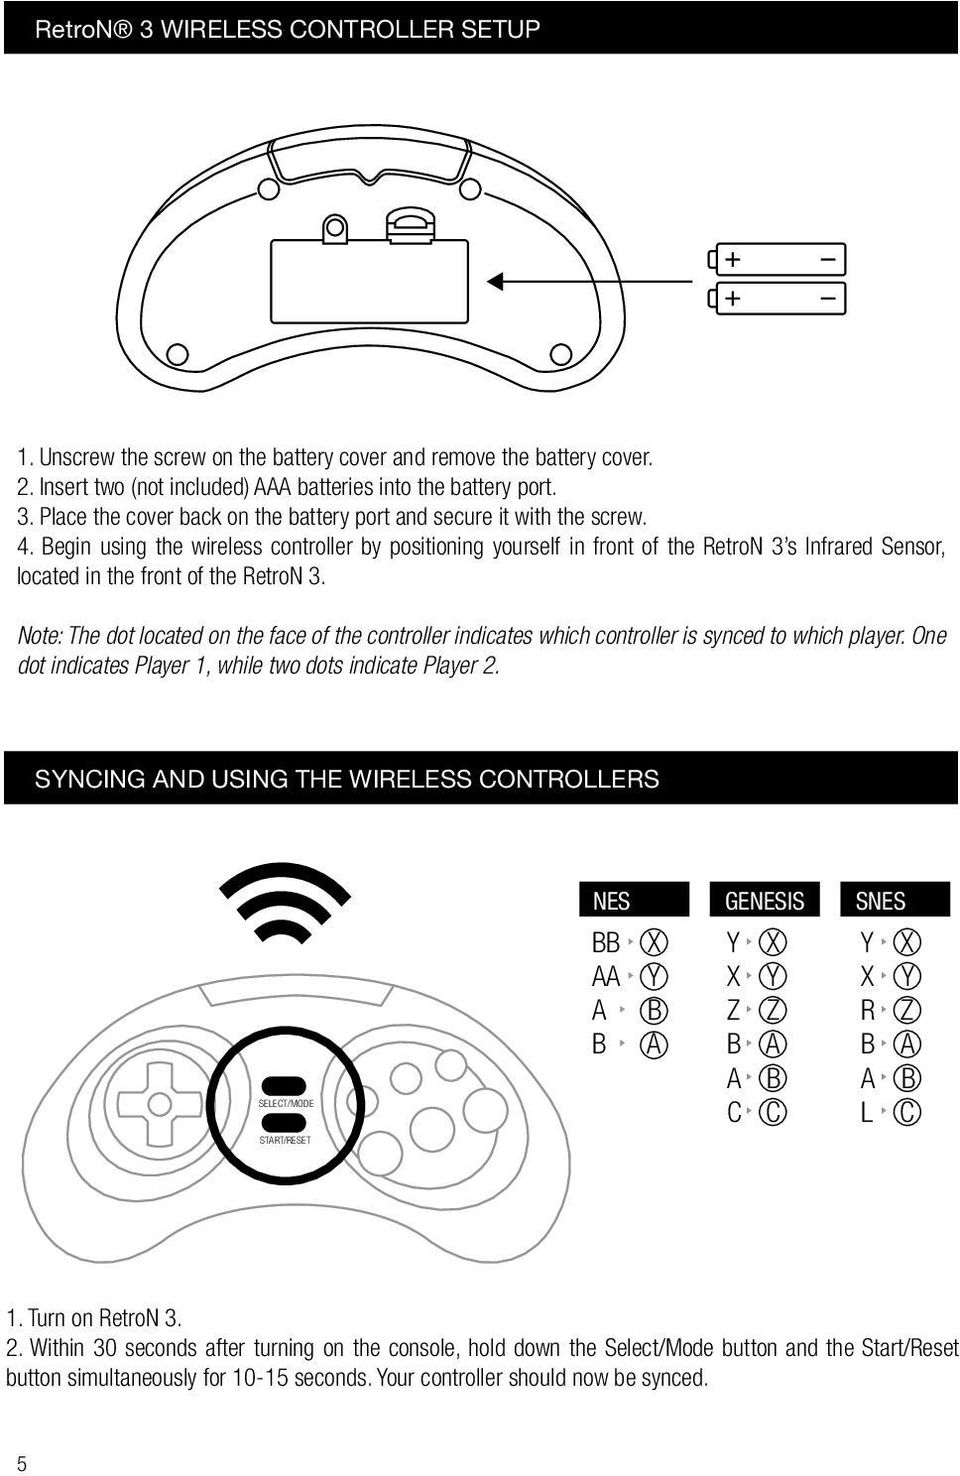 Note: The dot located on the face of the controller indicates which controller is synced to which player. One dot indicates Player 1, while two dots indicate Player 2.